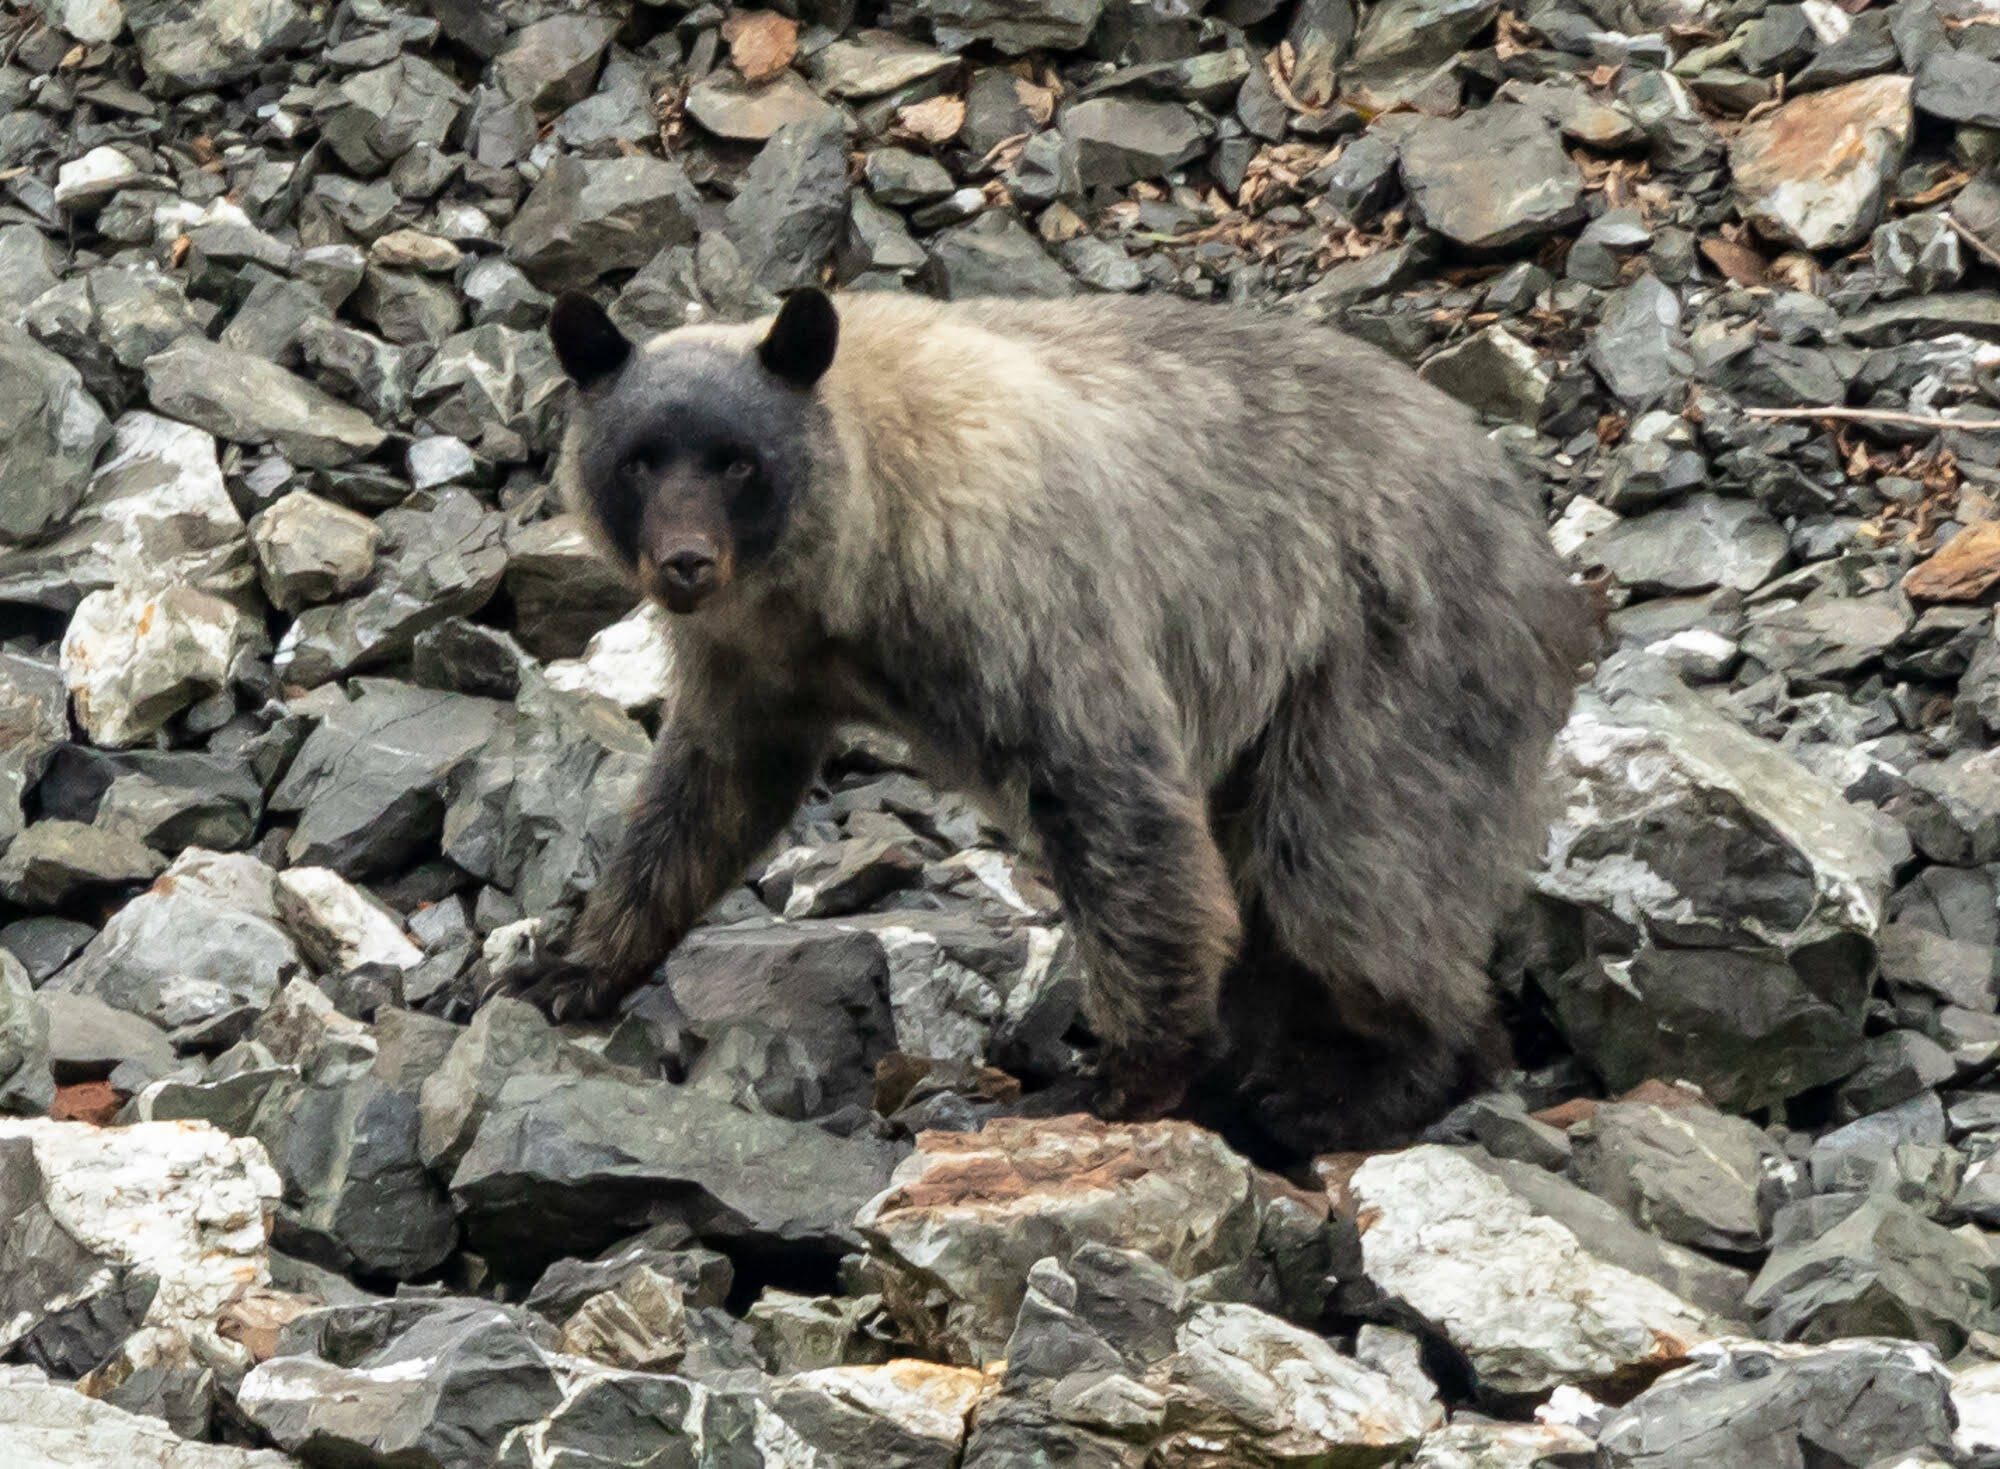 This photo shows a glacier bear walking along rocky terrain. There are four known populations of black bears in Southeast Alaska that include the lighter-colored bears, said Tania Lewis, a wildlife biologist for the National Park Service at Glacier Bay National Park and Preserve. (Courtesy Photo / Tom Hausler)